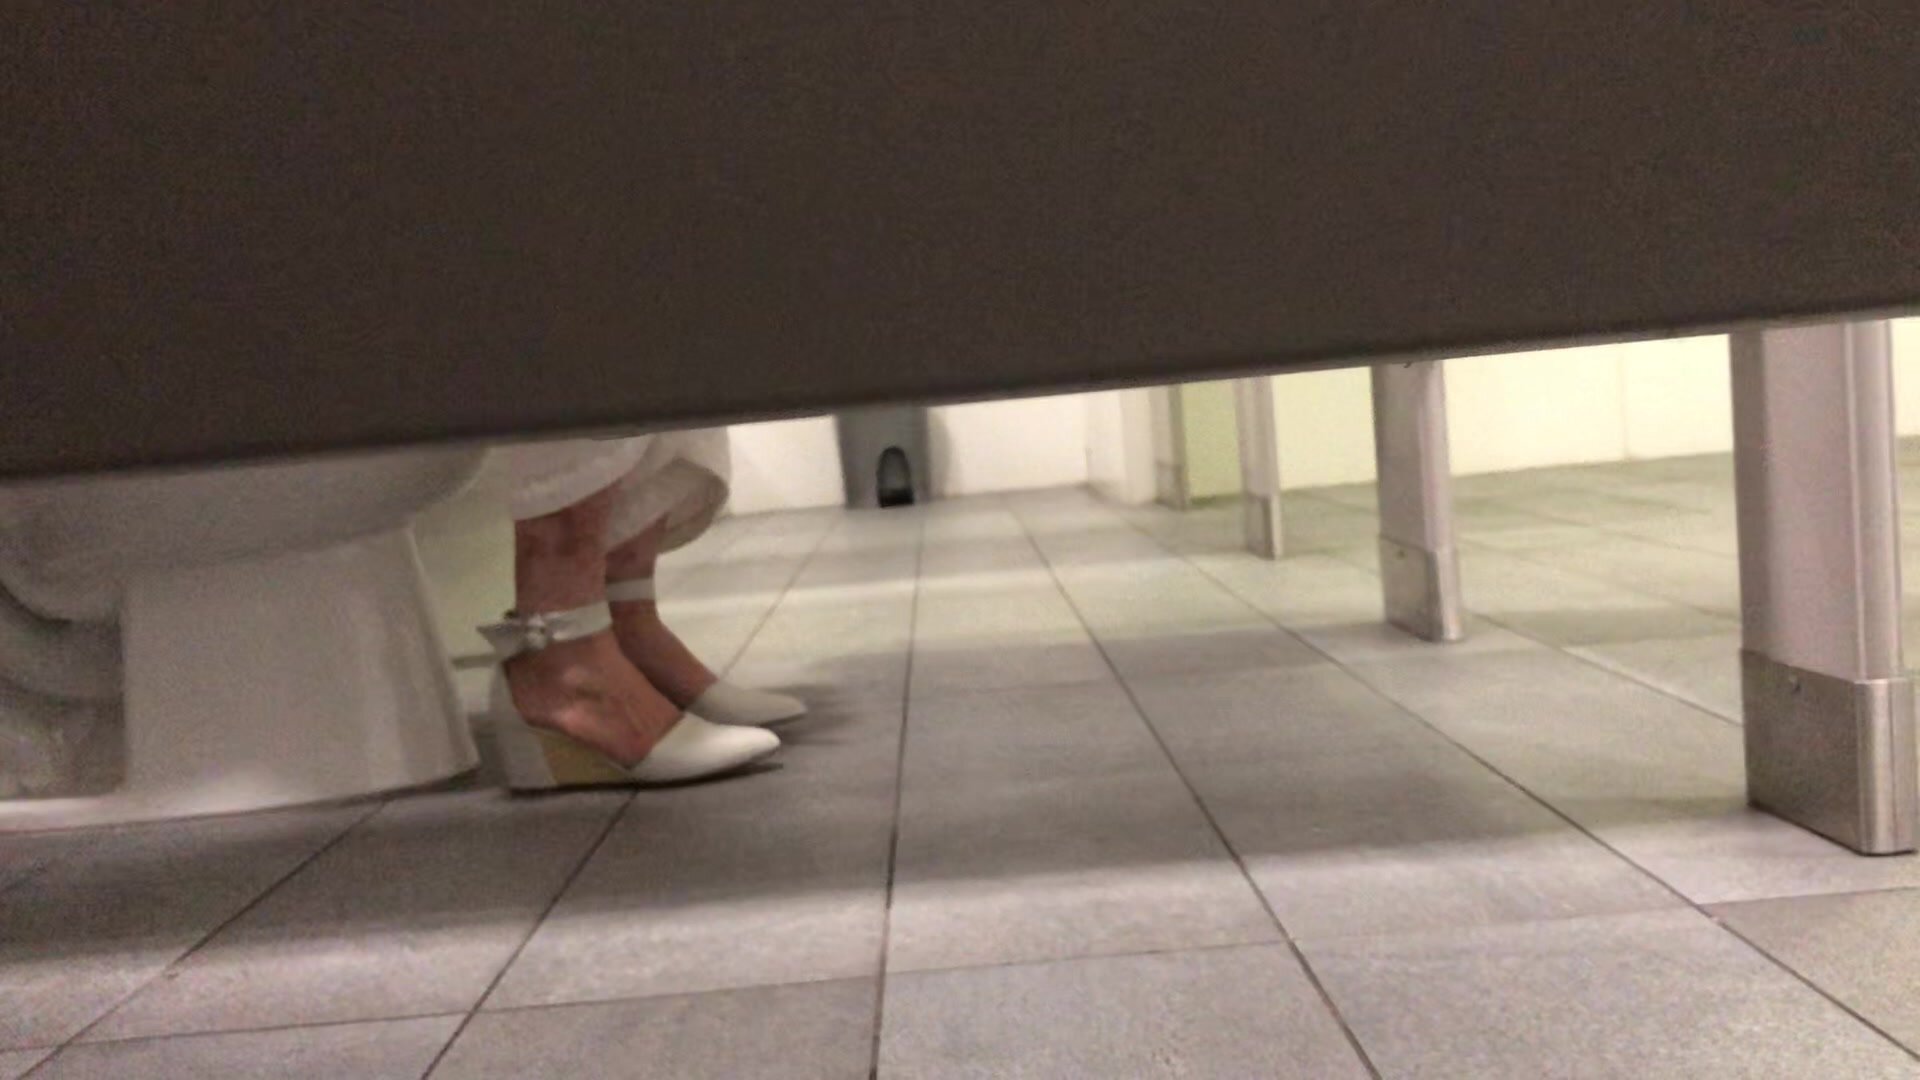 White Shoes Lady Peeing and Poop Attempt Voyeur Spy